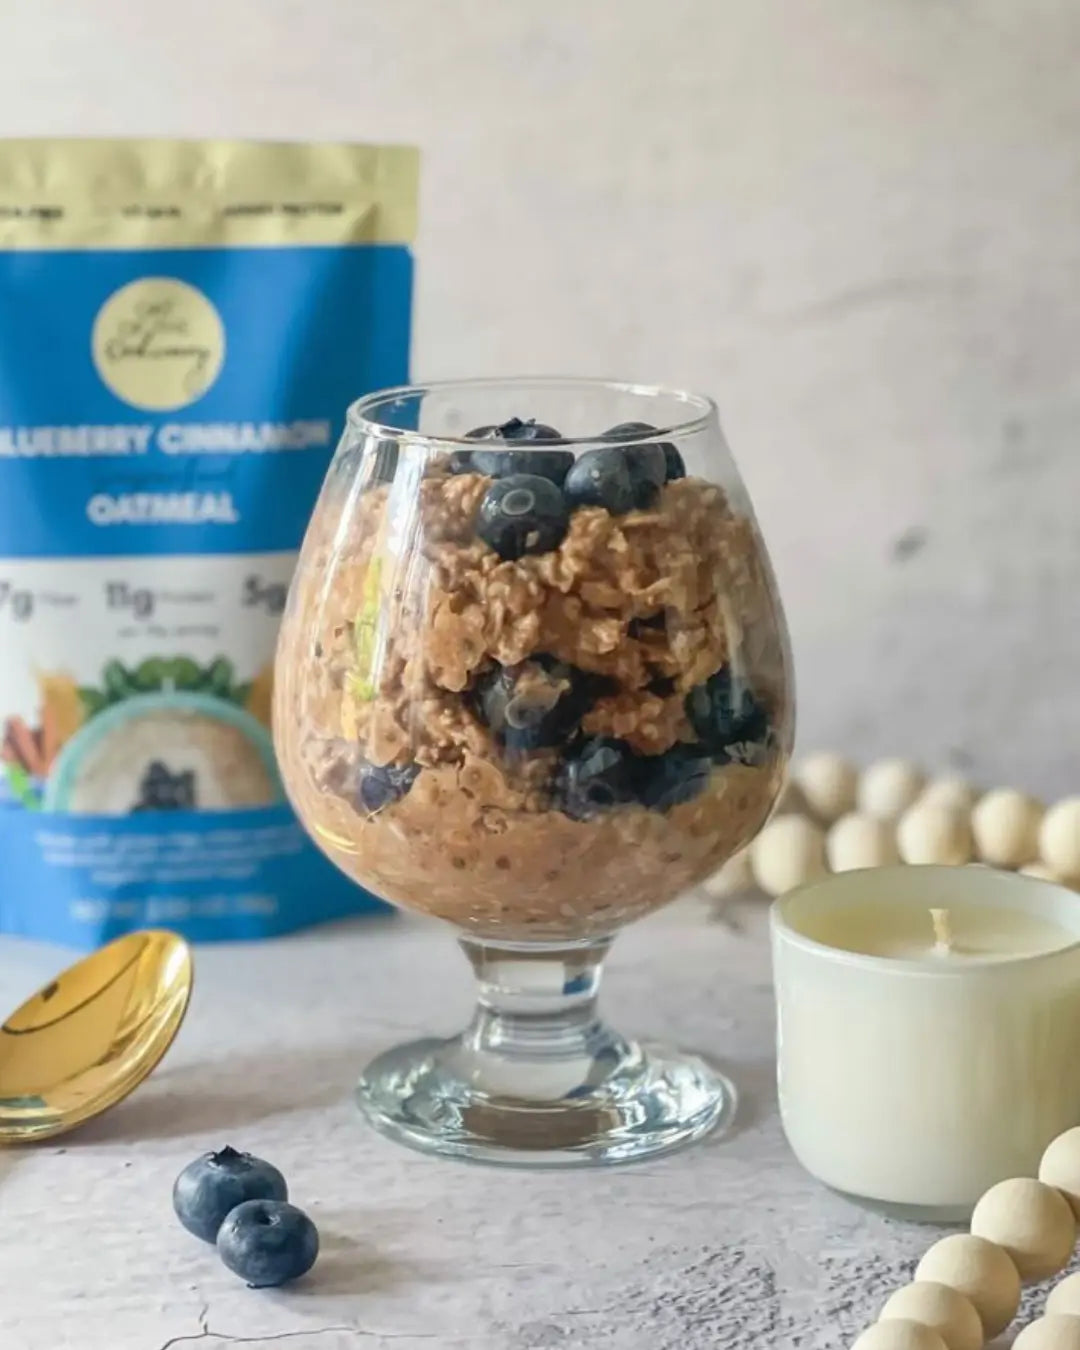 Blueberry oatmeal in a glass with a gold spoon and decorations.